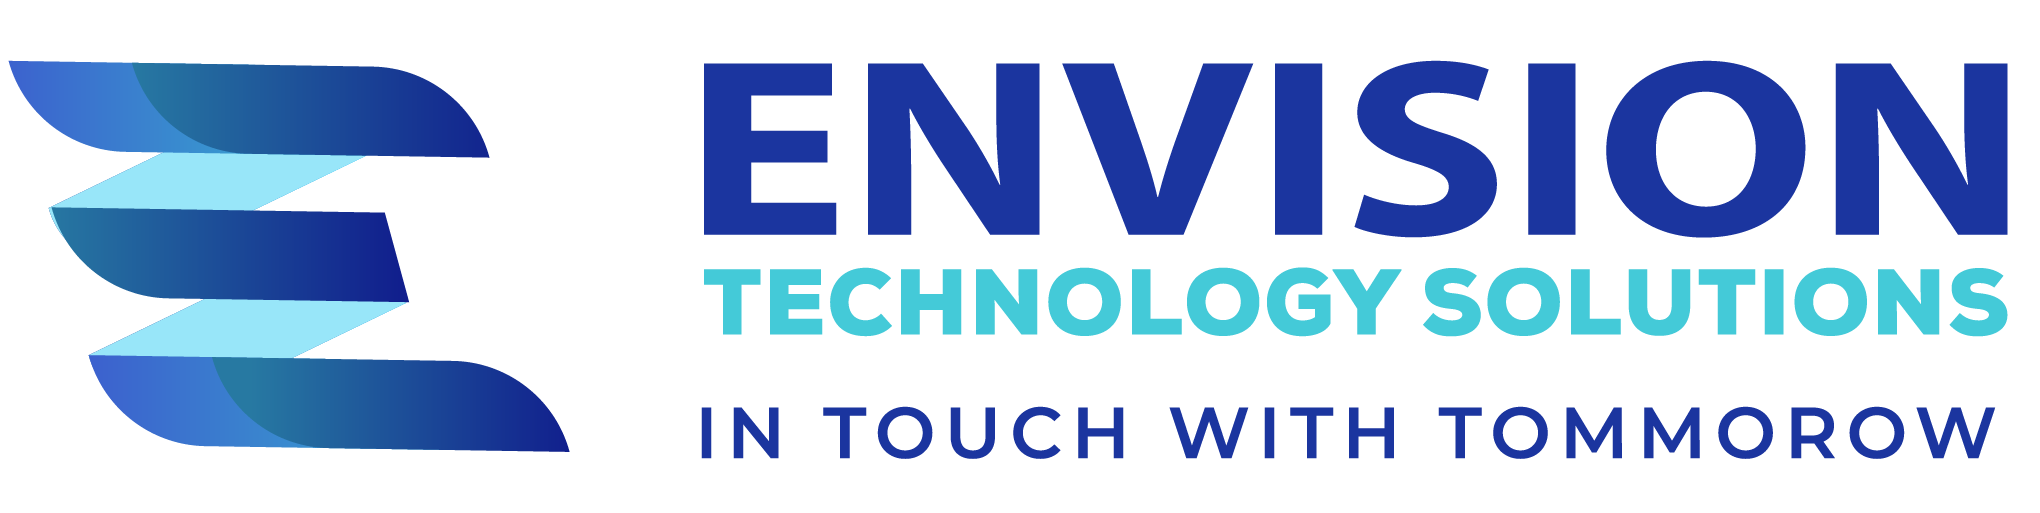 Envision Technology Solution